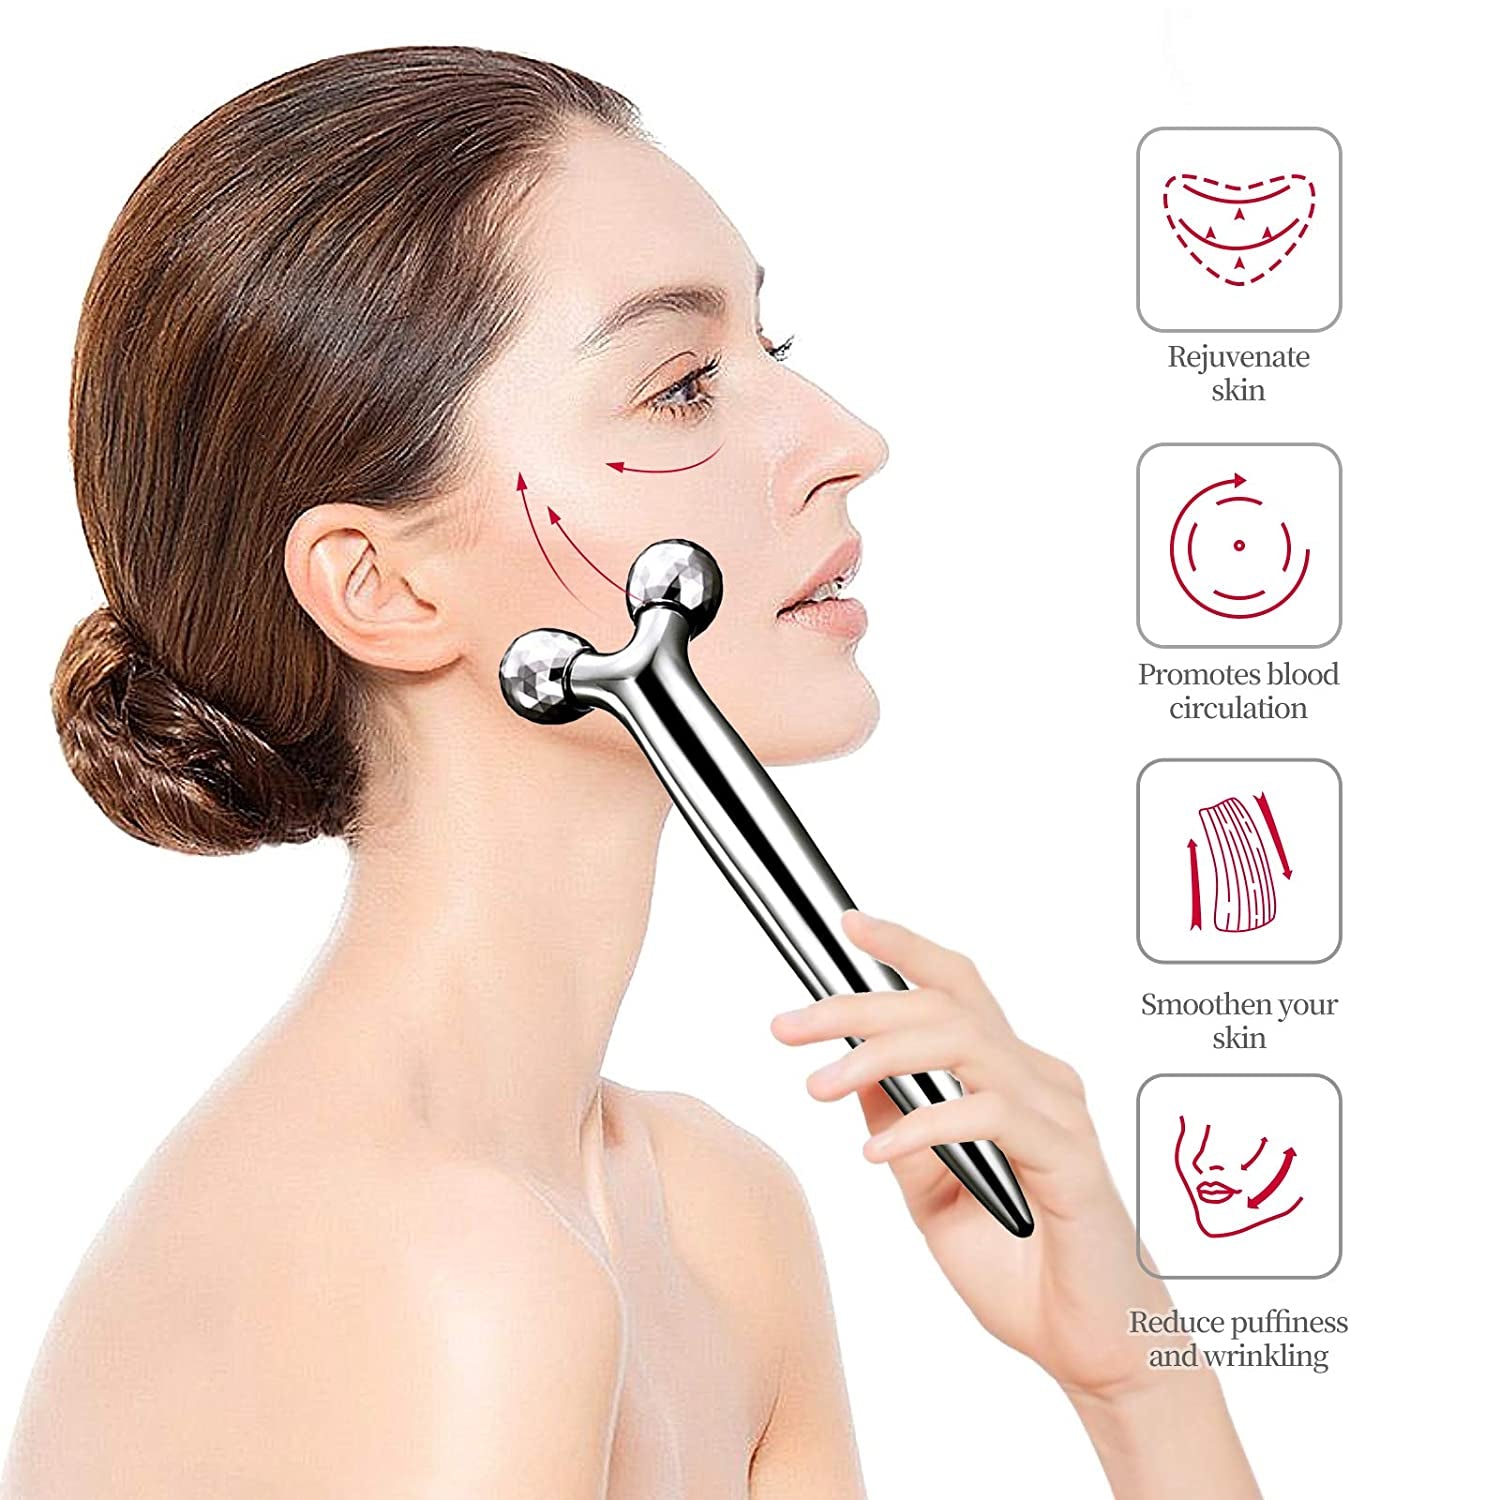  Face Roller Massager - Enhances Skin Tone and Promotes a Youthful Appearance